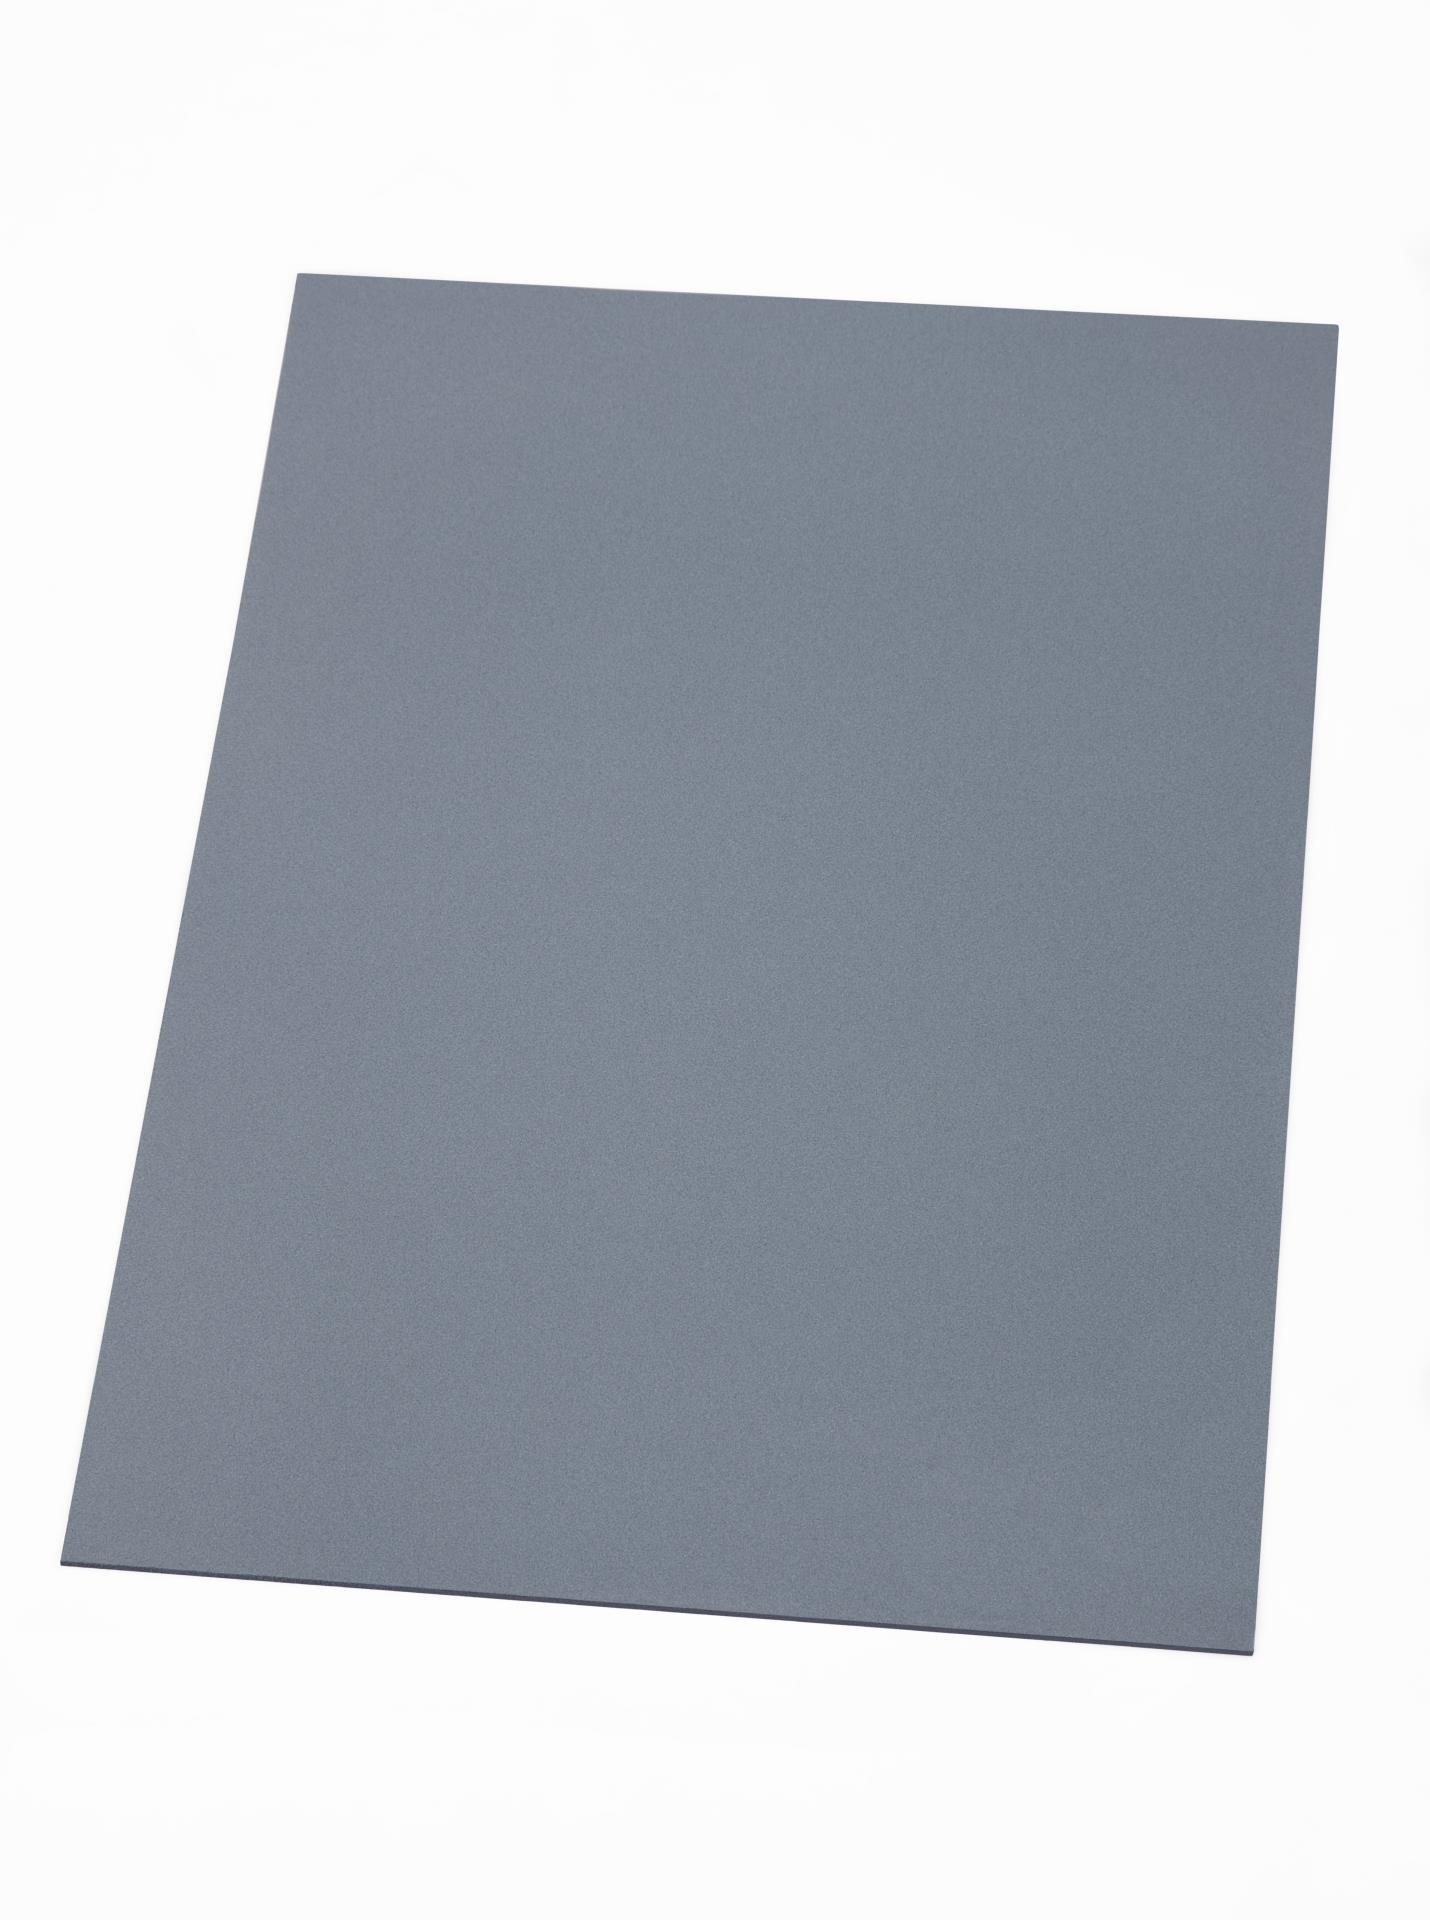 3M™ Thermally Conductive Interface Pad Sheet 5519, 210 mm x 155 mm x 1.5  mm, 20/Case Aircraft 6297294